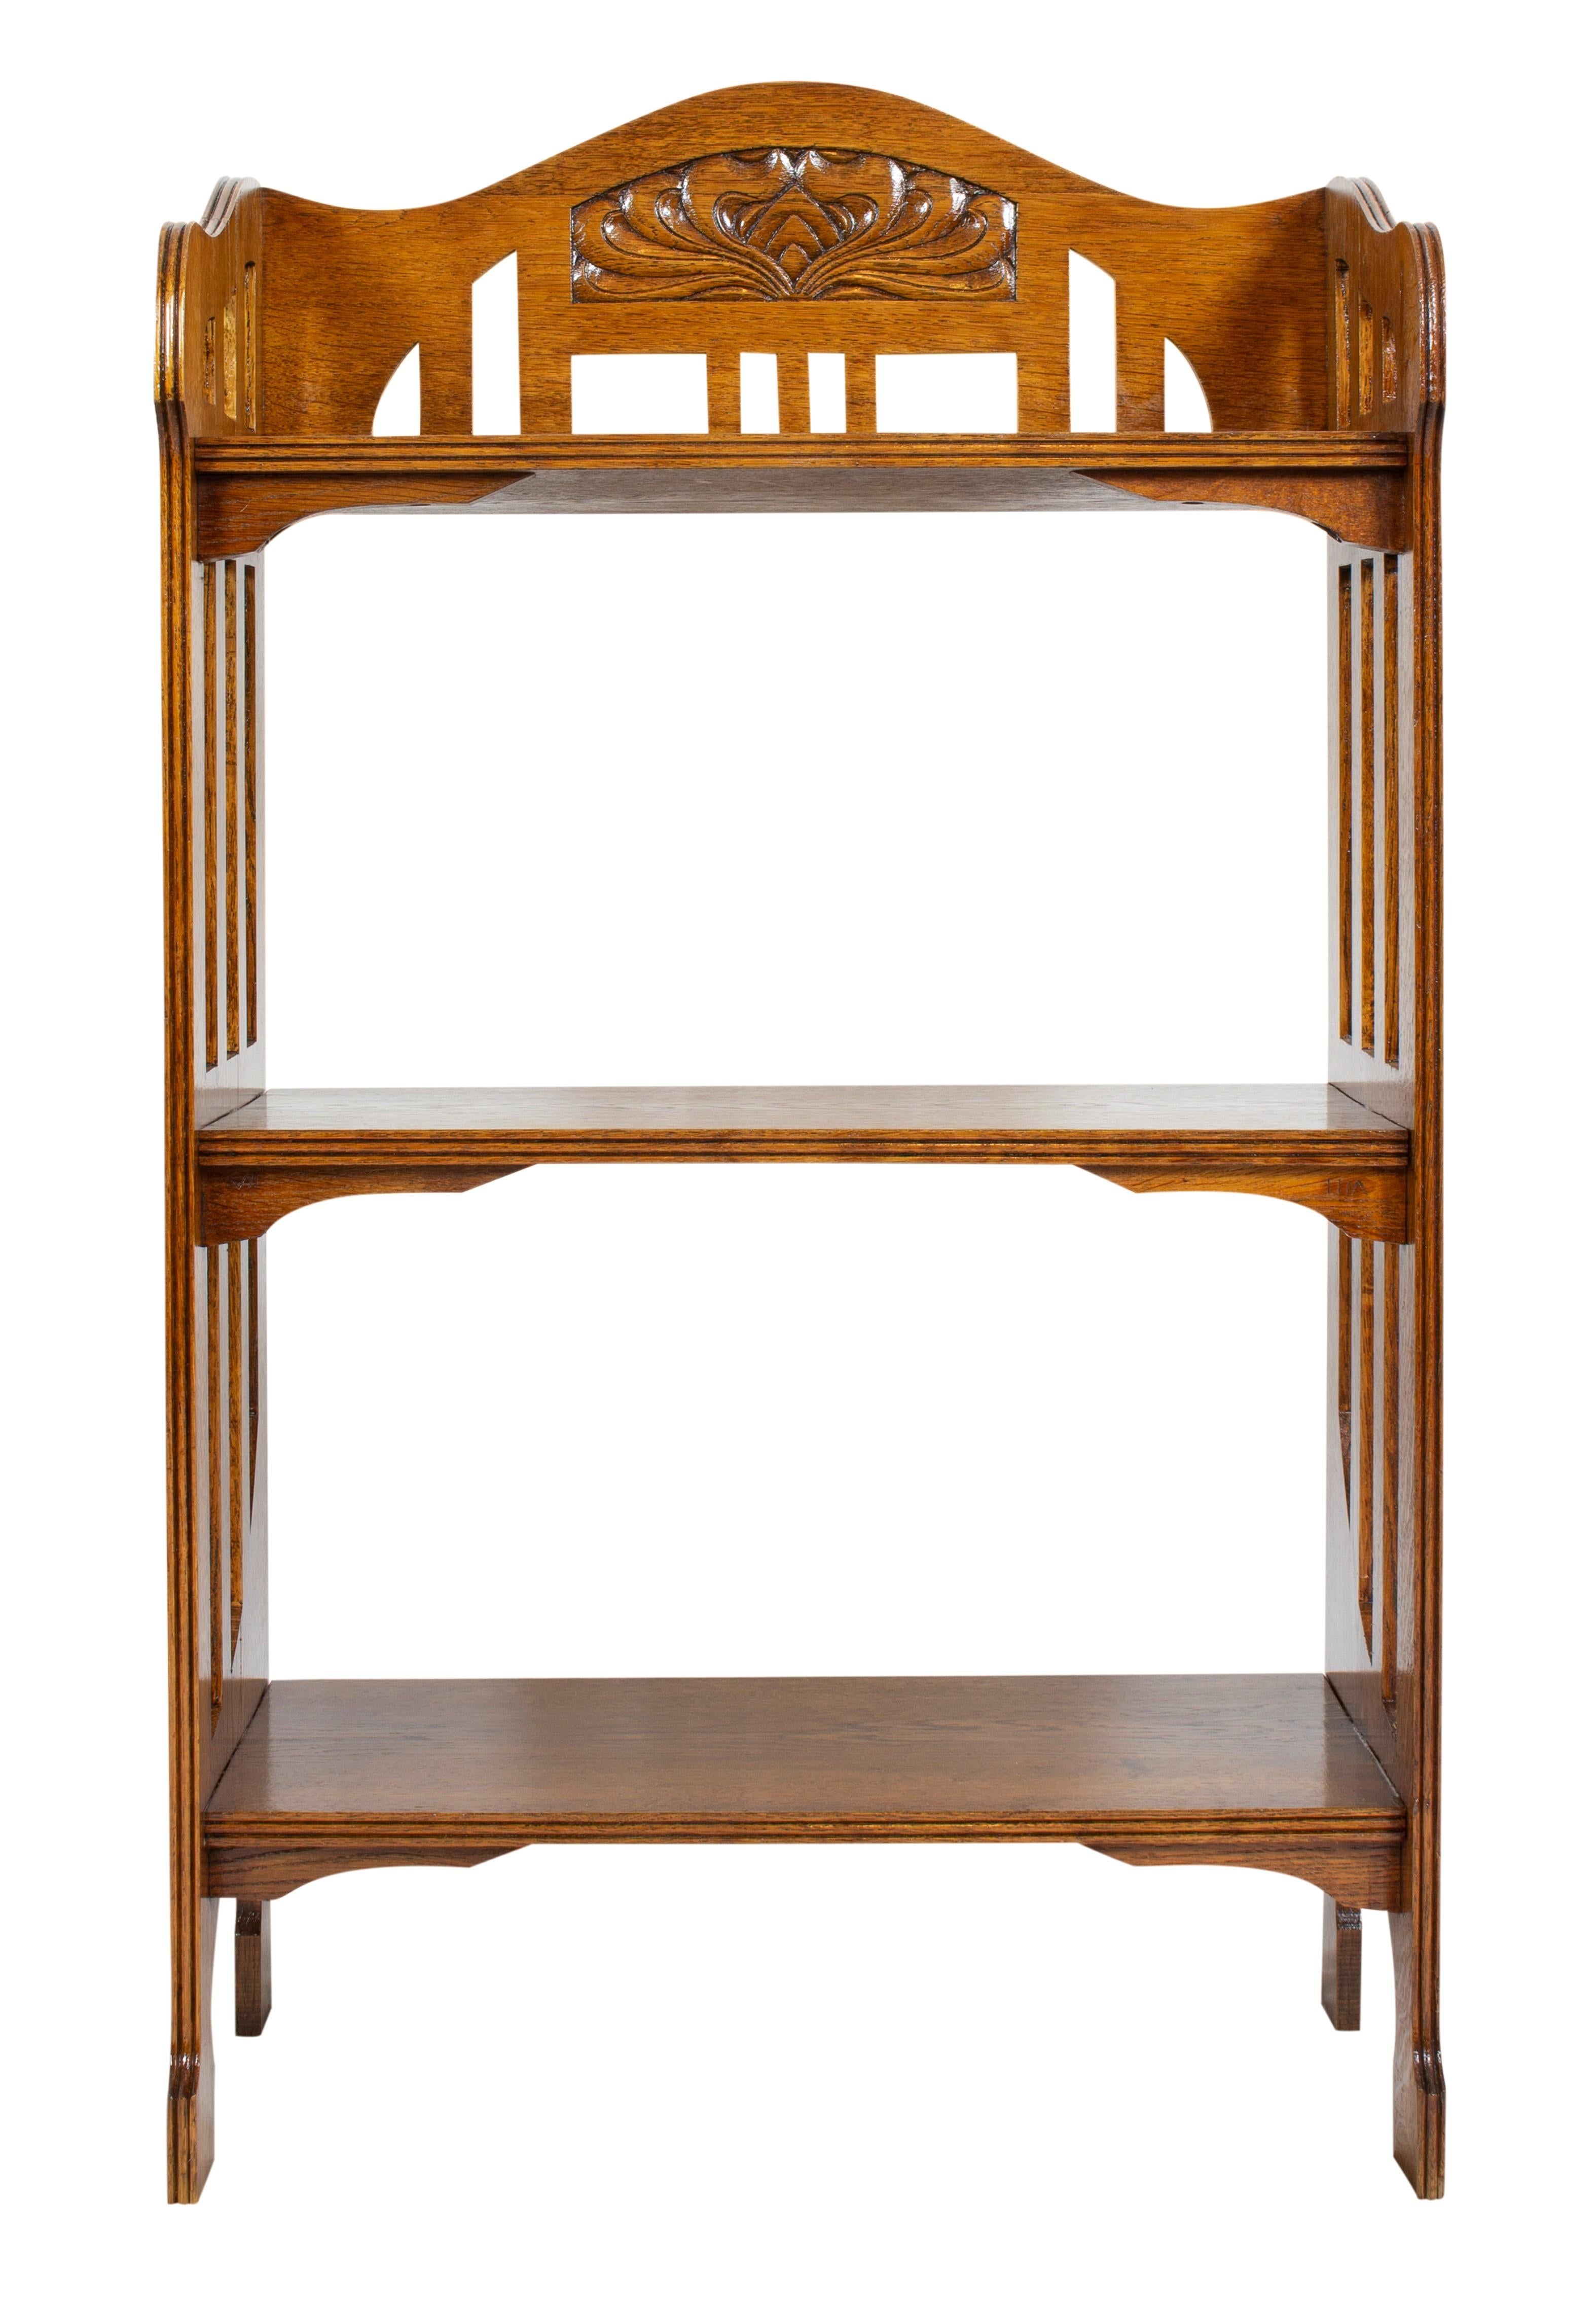 The small shelf dates from the Art Nouveau period and was made of oakwood. The shelf is in a good restored condition.